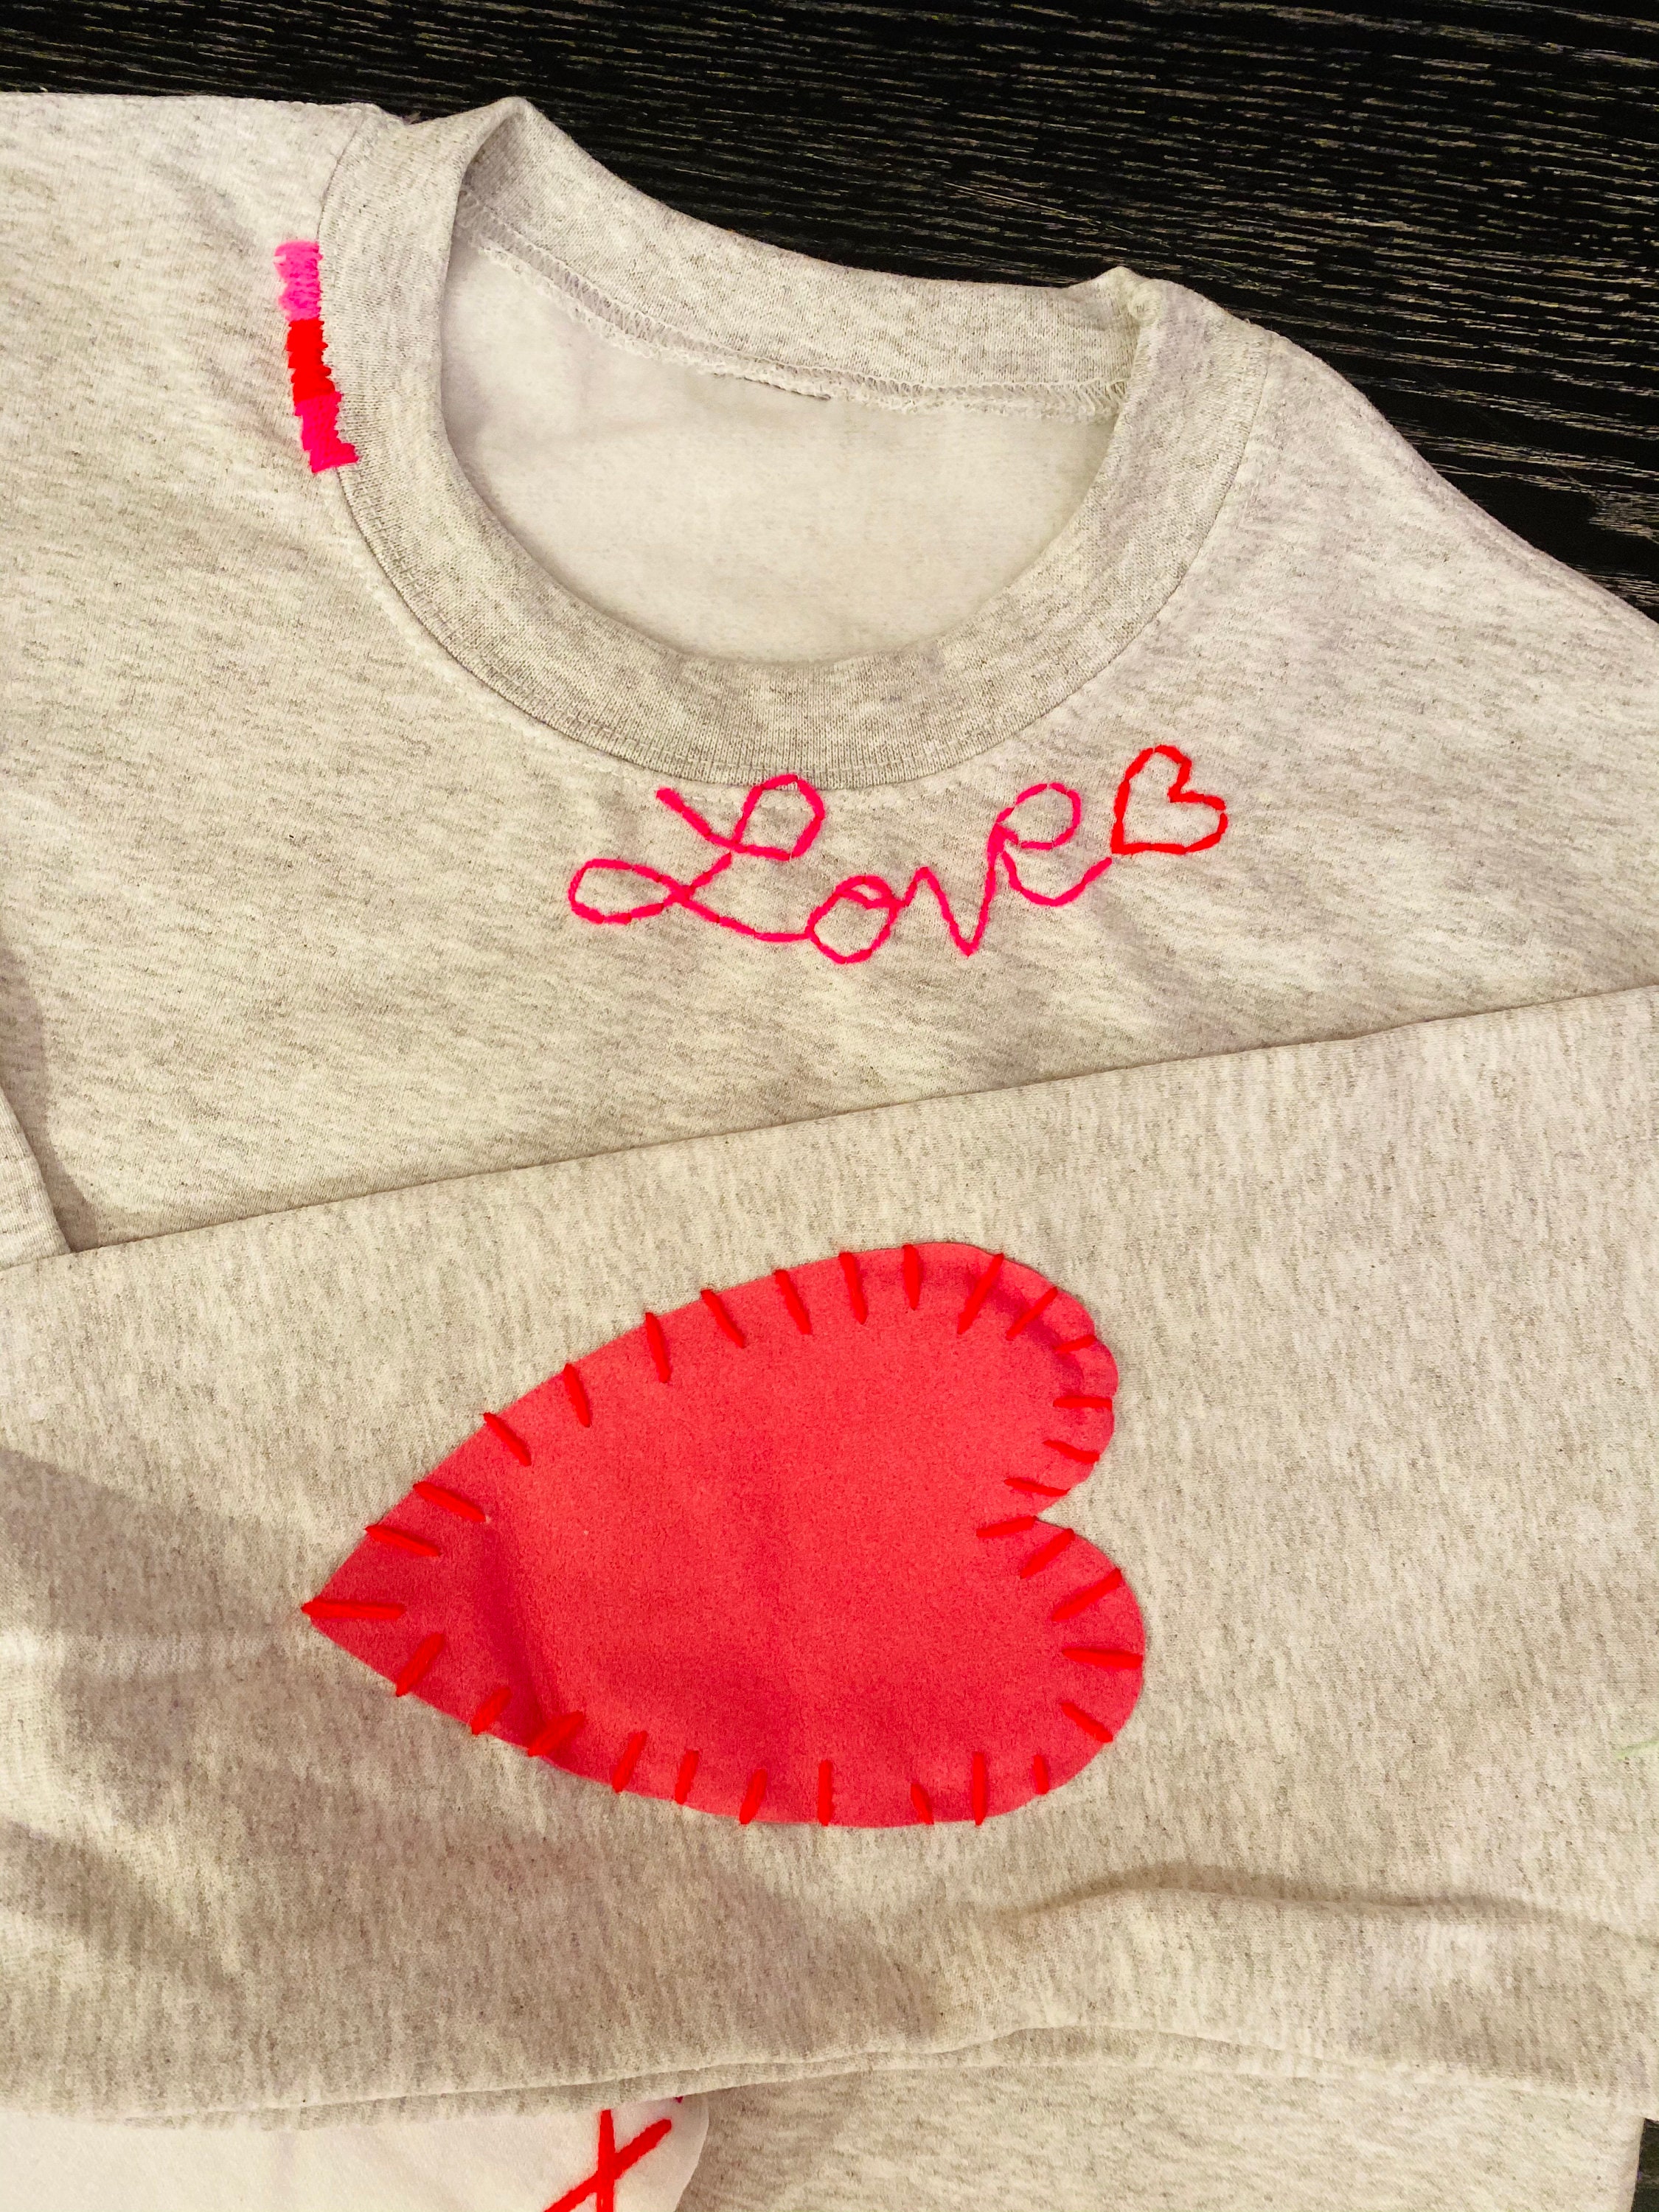 Ultrasuede Heart Elbow Patched Crew Neck - Etsy